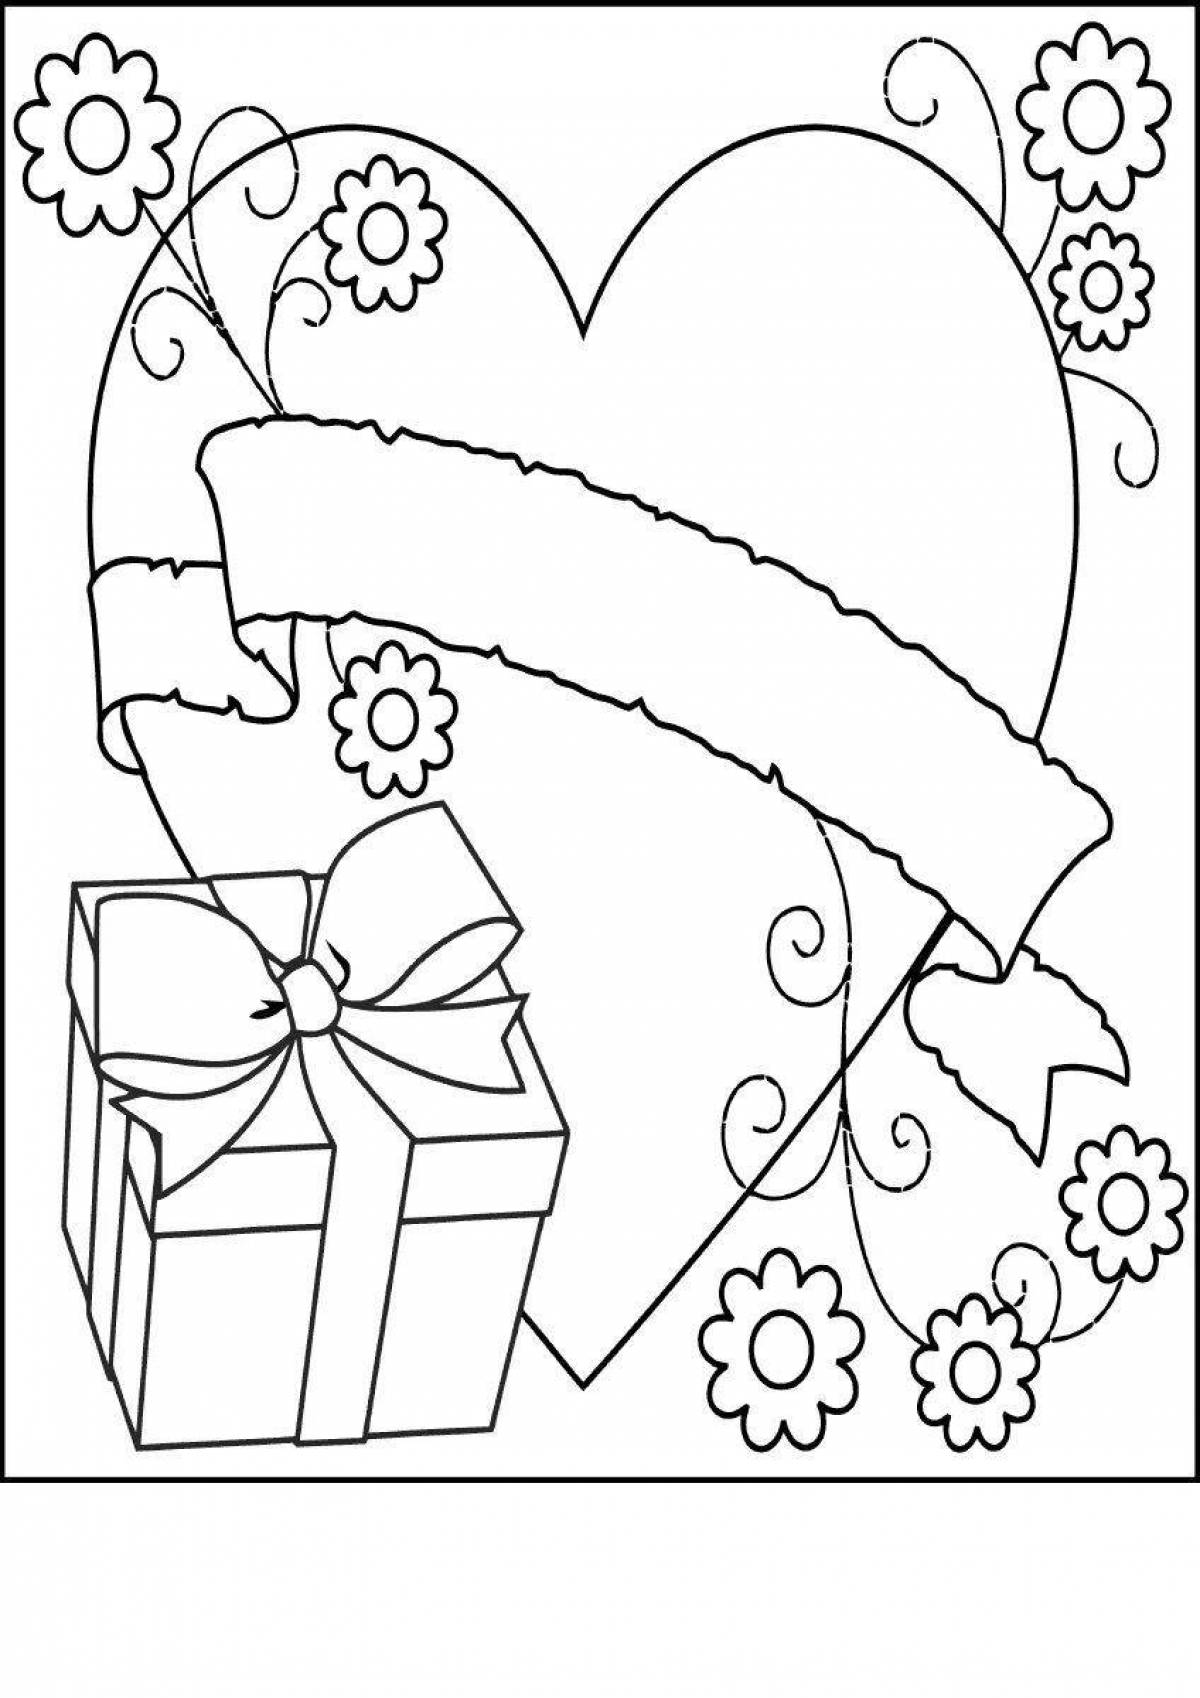 Coloring book shiny gift for mom